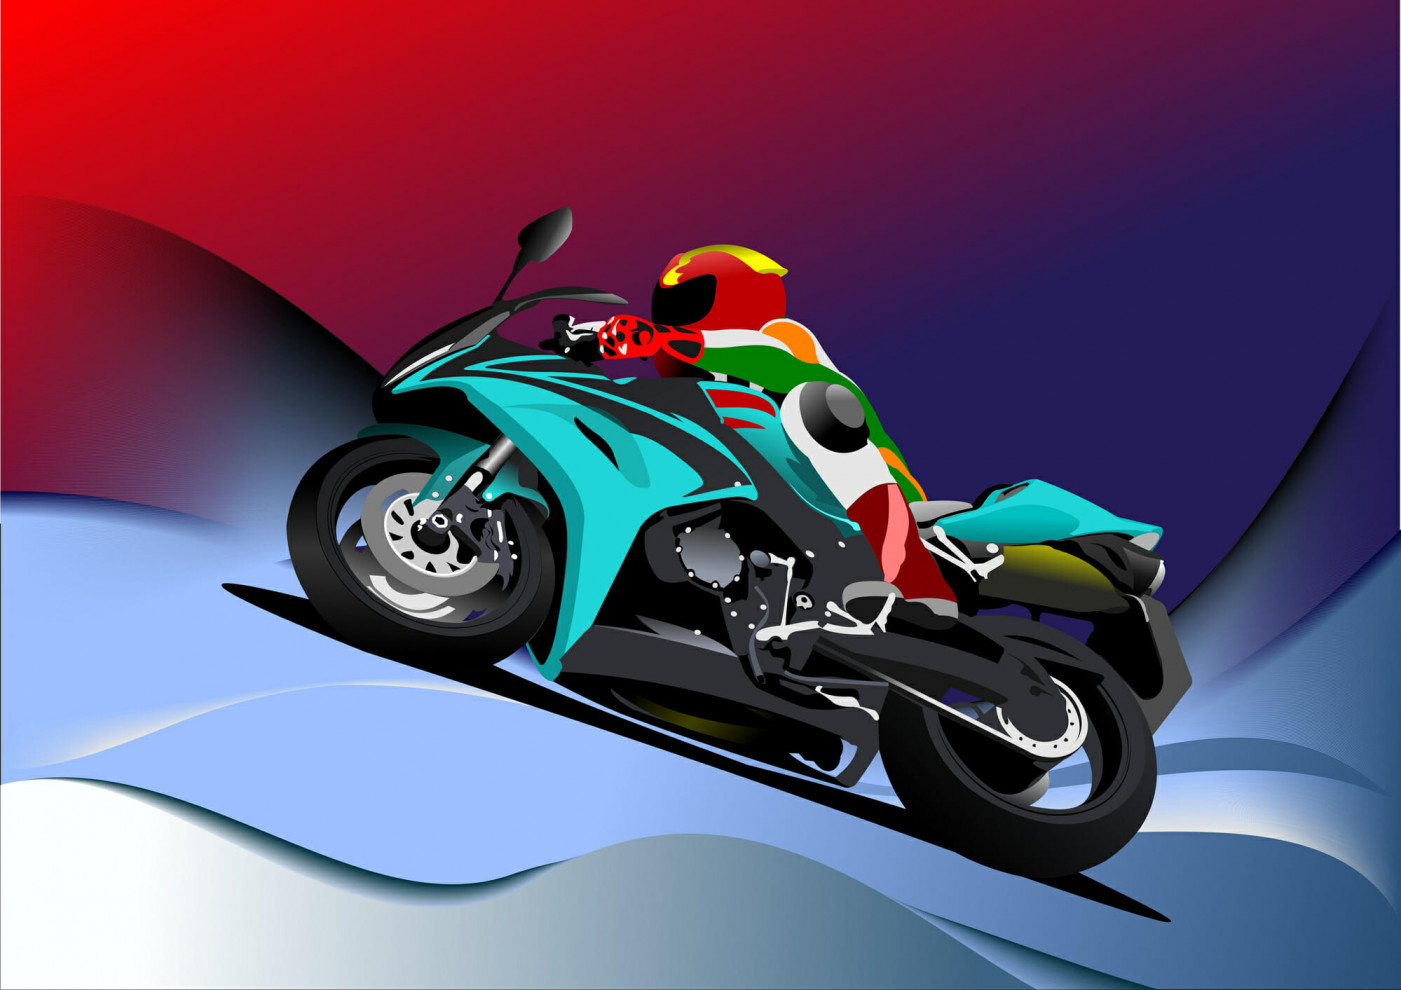 Abstract background with motorcycle image. Iron horse. Vector i